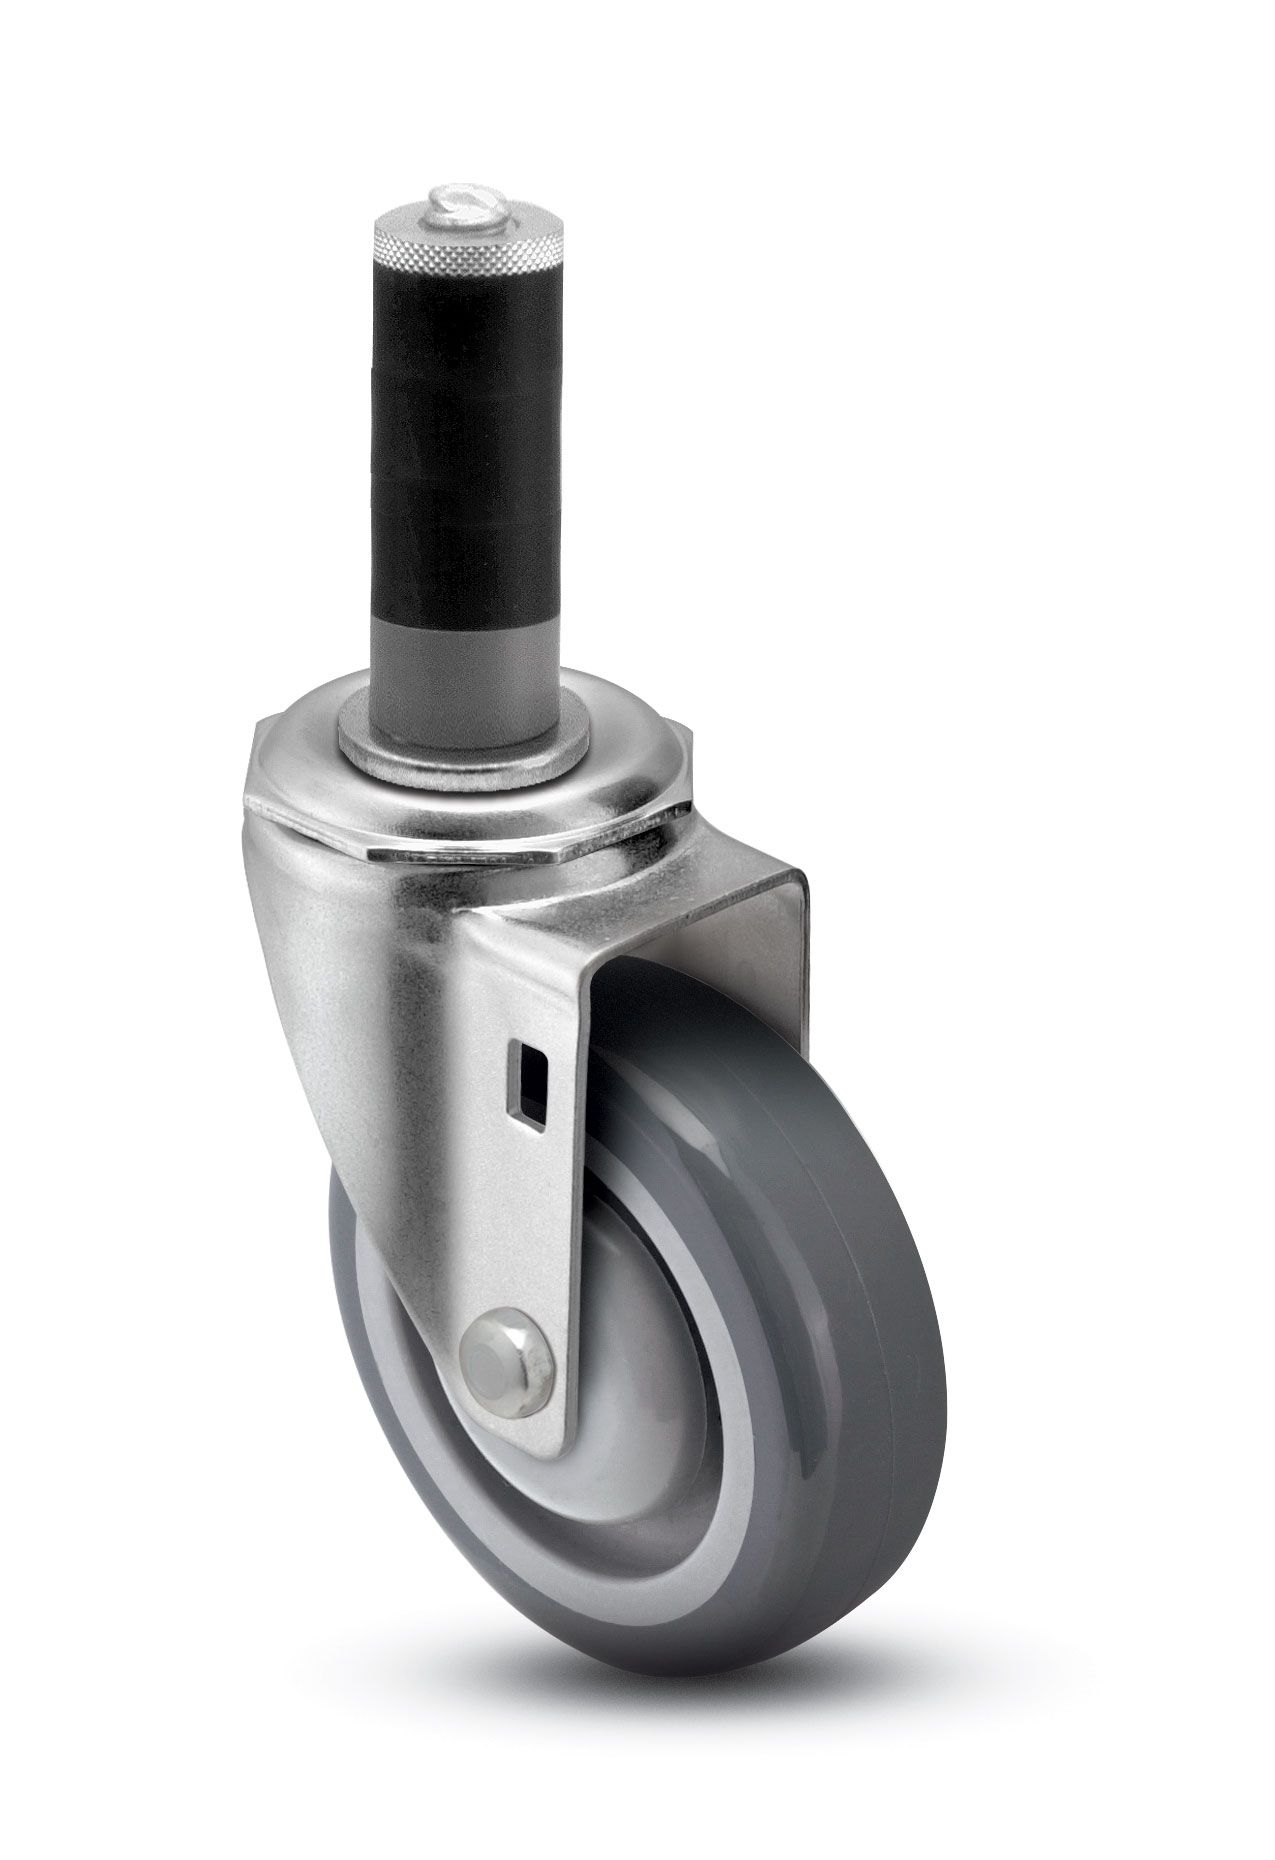 Caster; Swivel; 5" x 1-1/4"; PolyU on PolyO (Gray); Expandable Adapter (1-1/4" I.D. x 1-5/16 ID tubing); Zinc; Precision Ball Brng; 300#; Total Lock; Dust Cover (Item #65051)